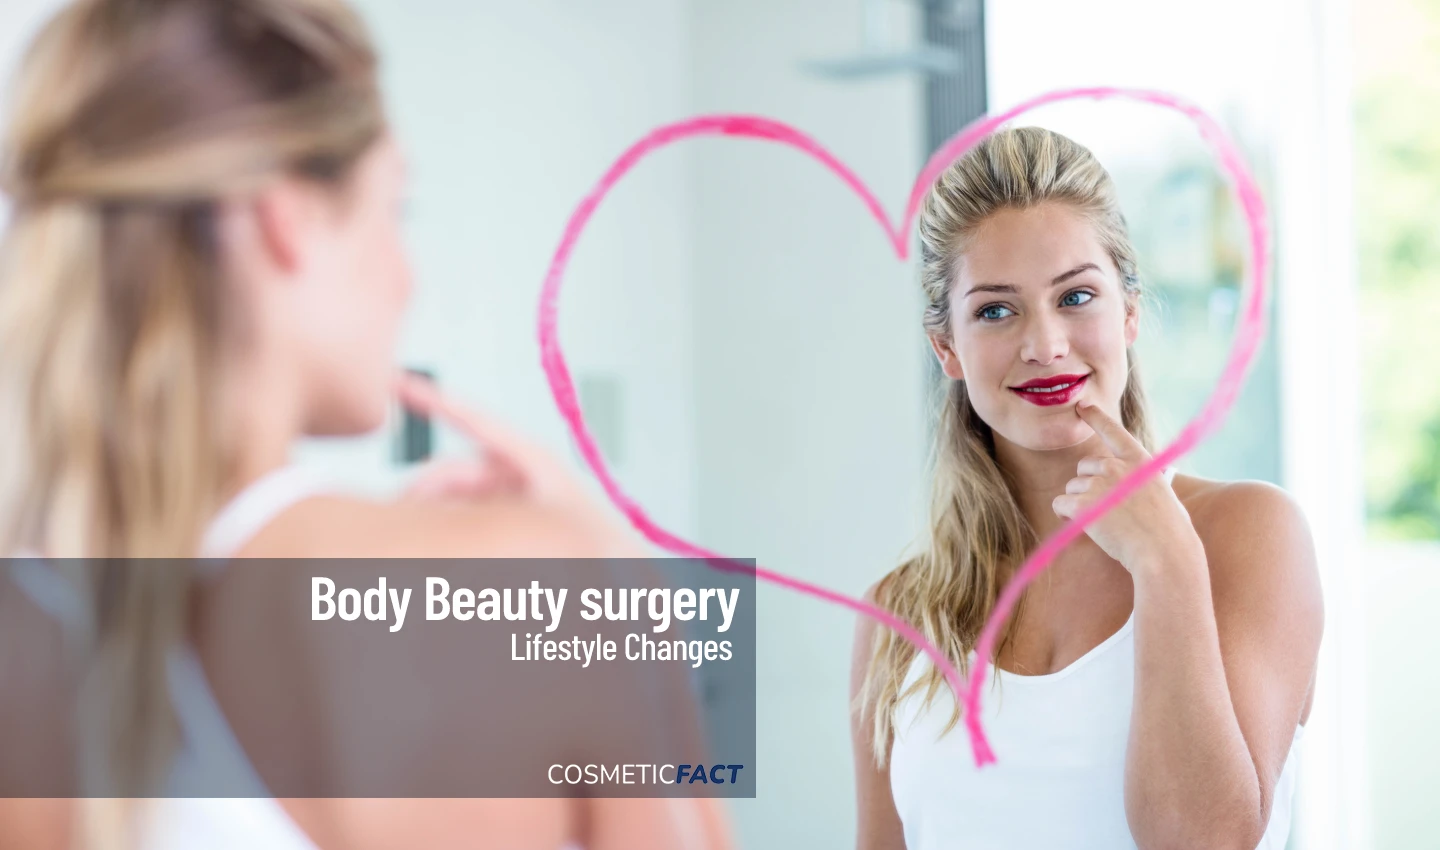 A smiling woman looks at herself in the mirror after body beauty surgery, representing the positive psychological impact of surgery.